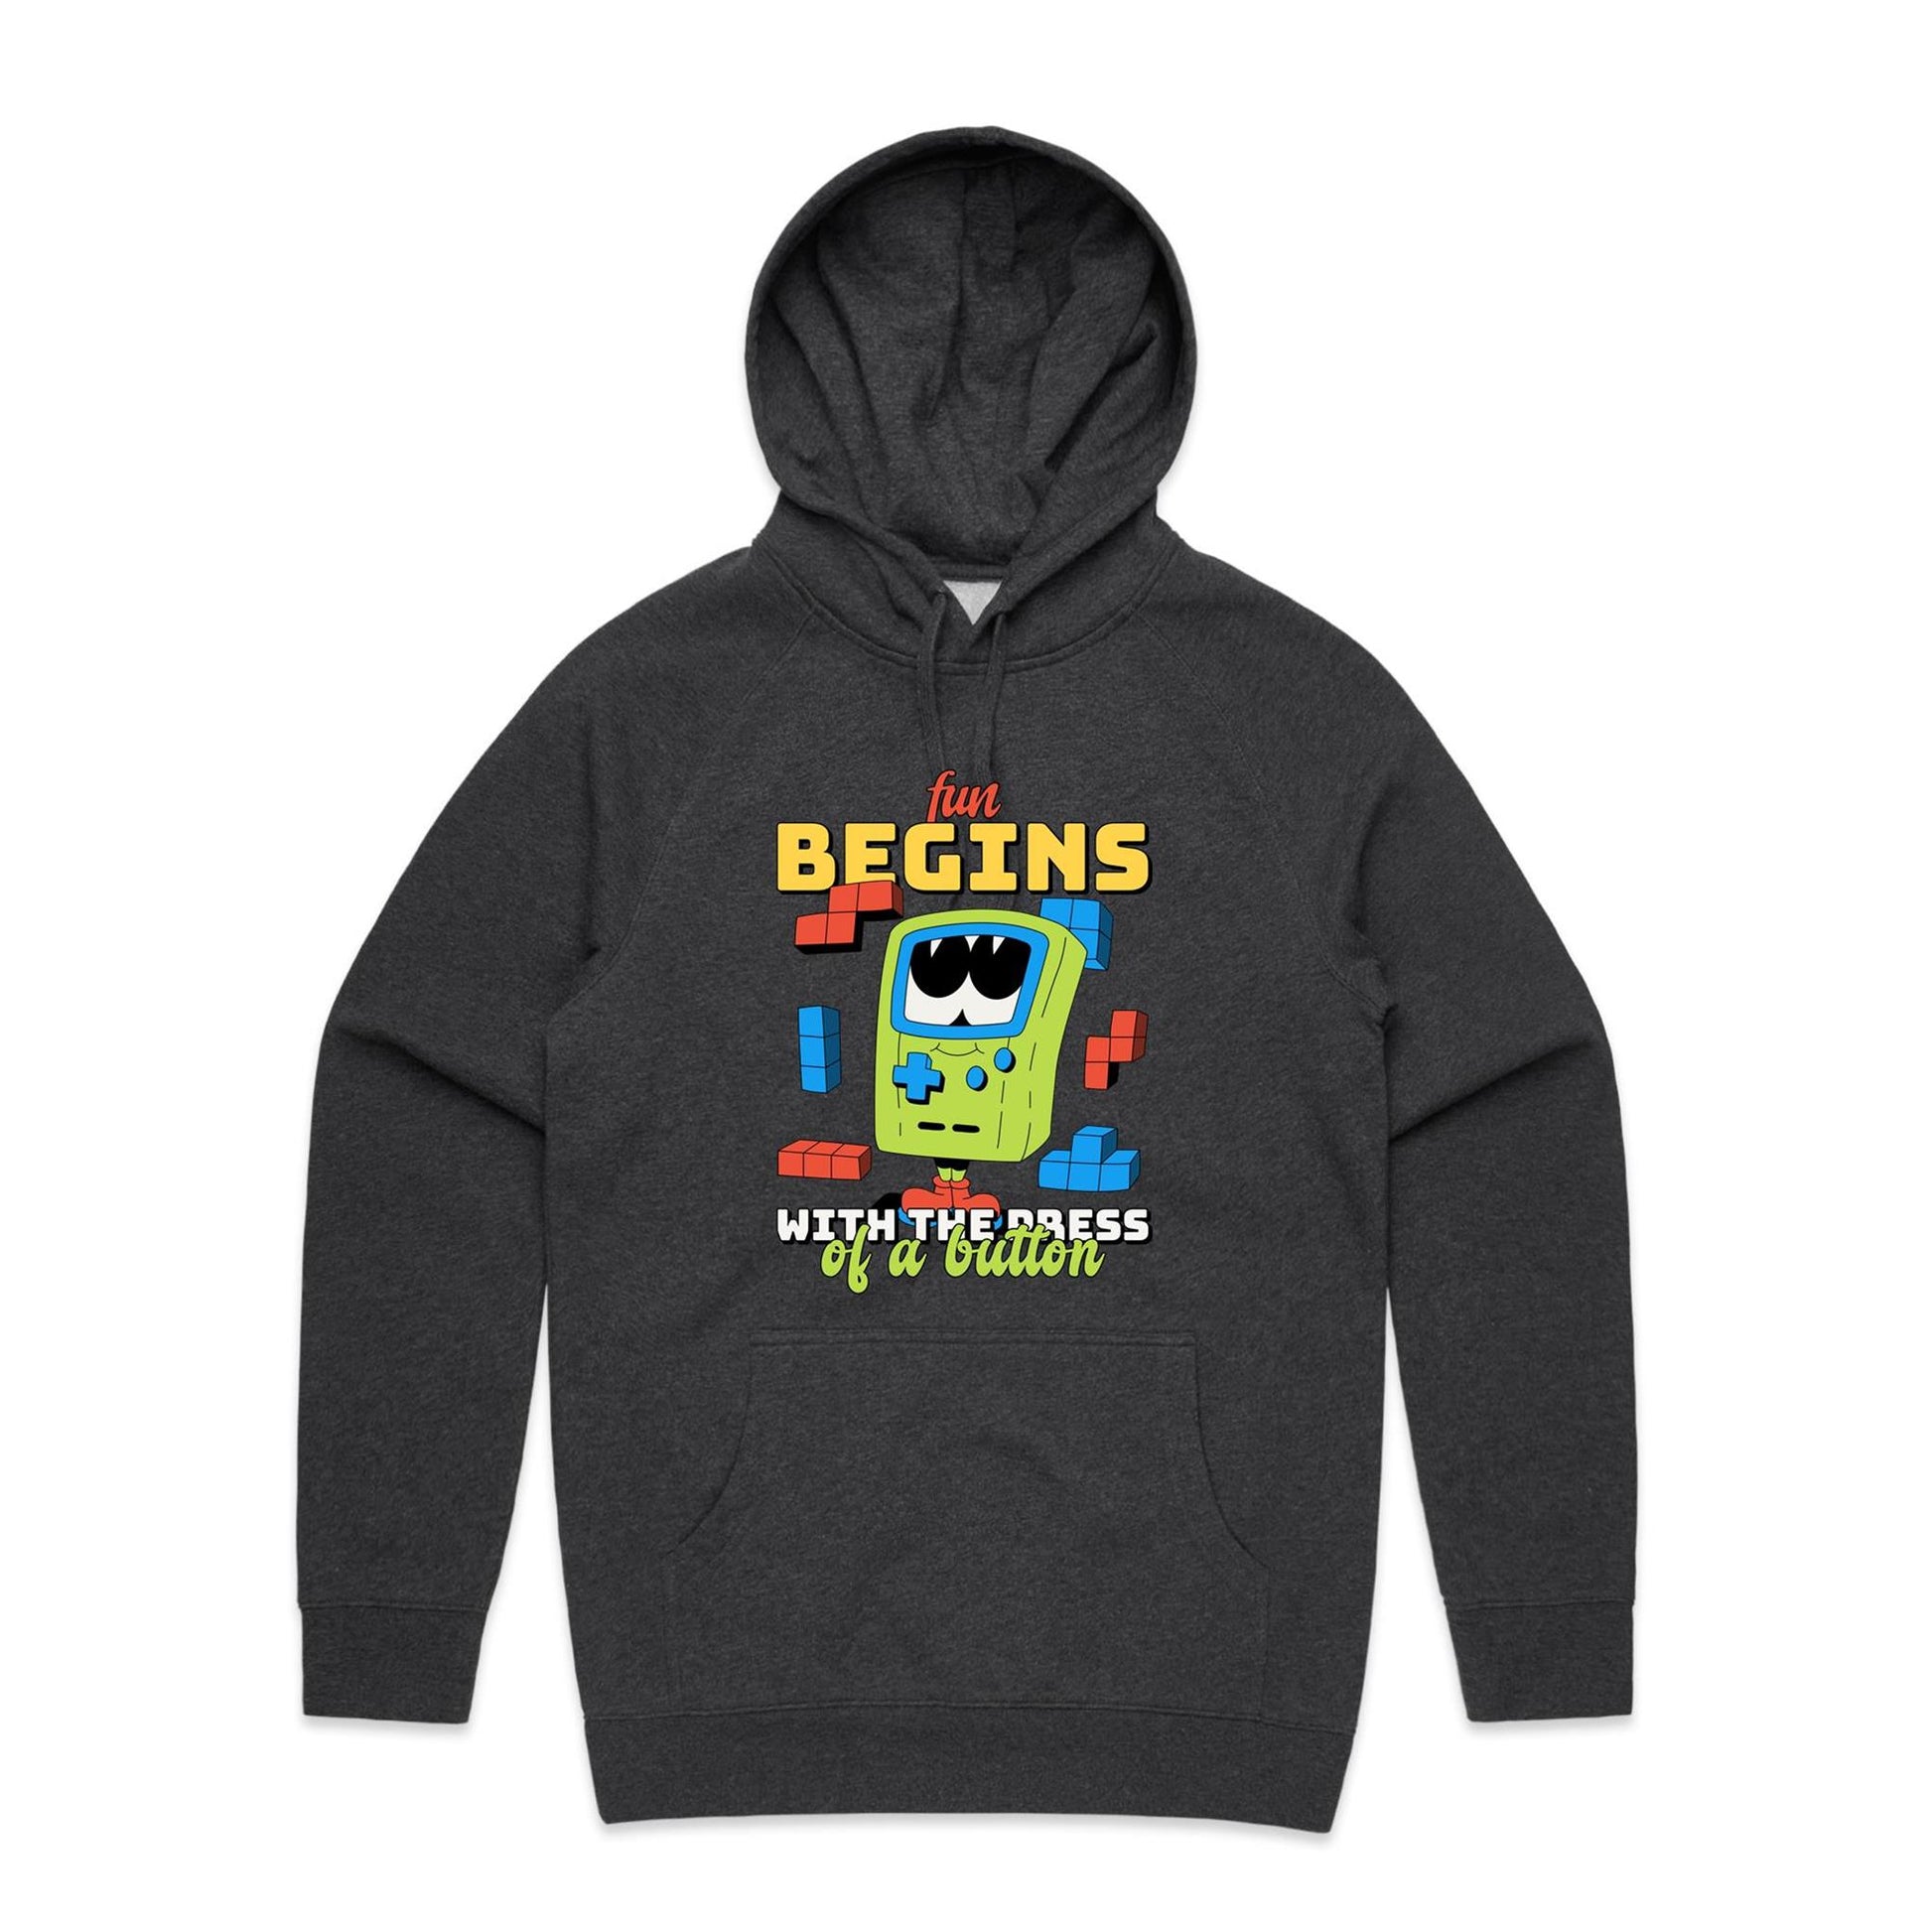 Fun Begins With The Press Of A Button - Supply Hood Asphalt Marle Mens Supply Hoodie Games